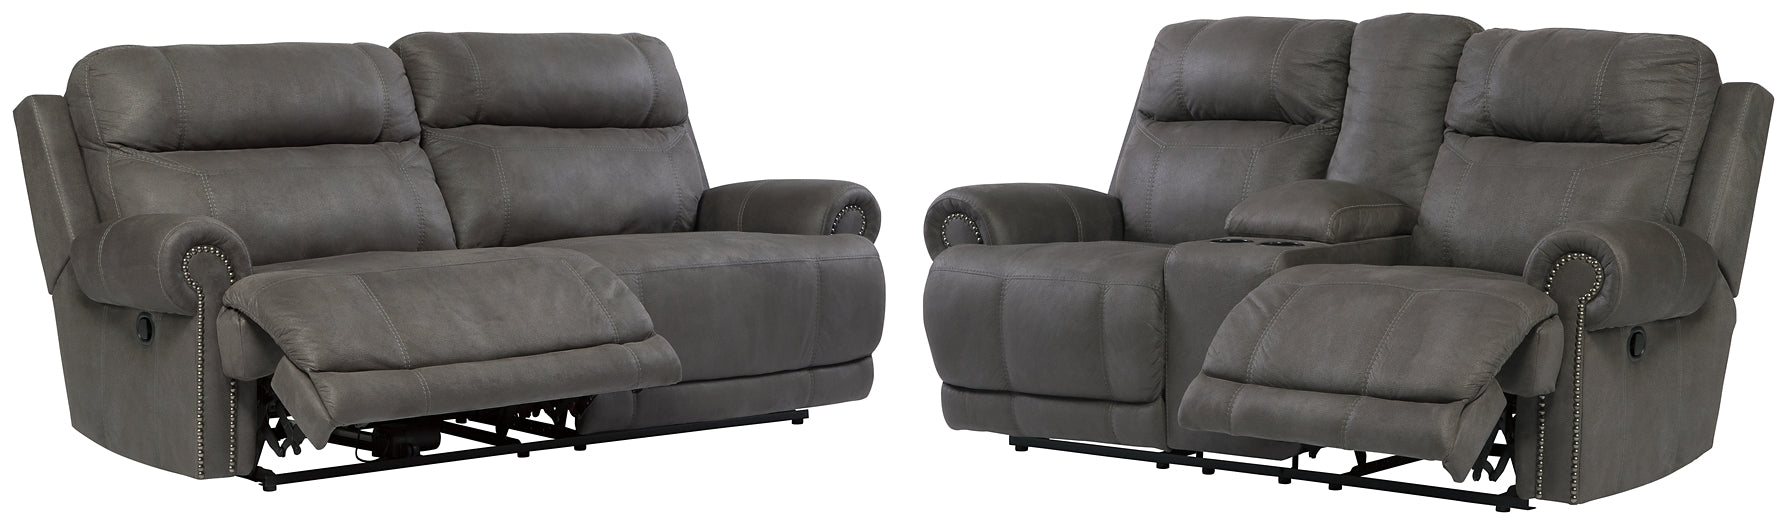 Austere Manual Reclining Sofa and Loveseat